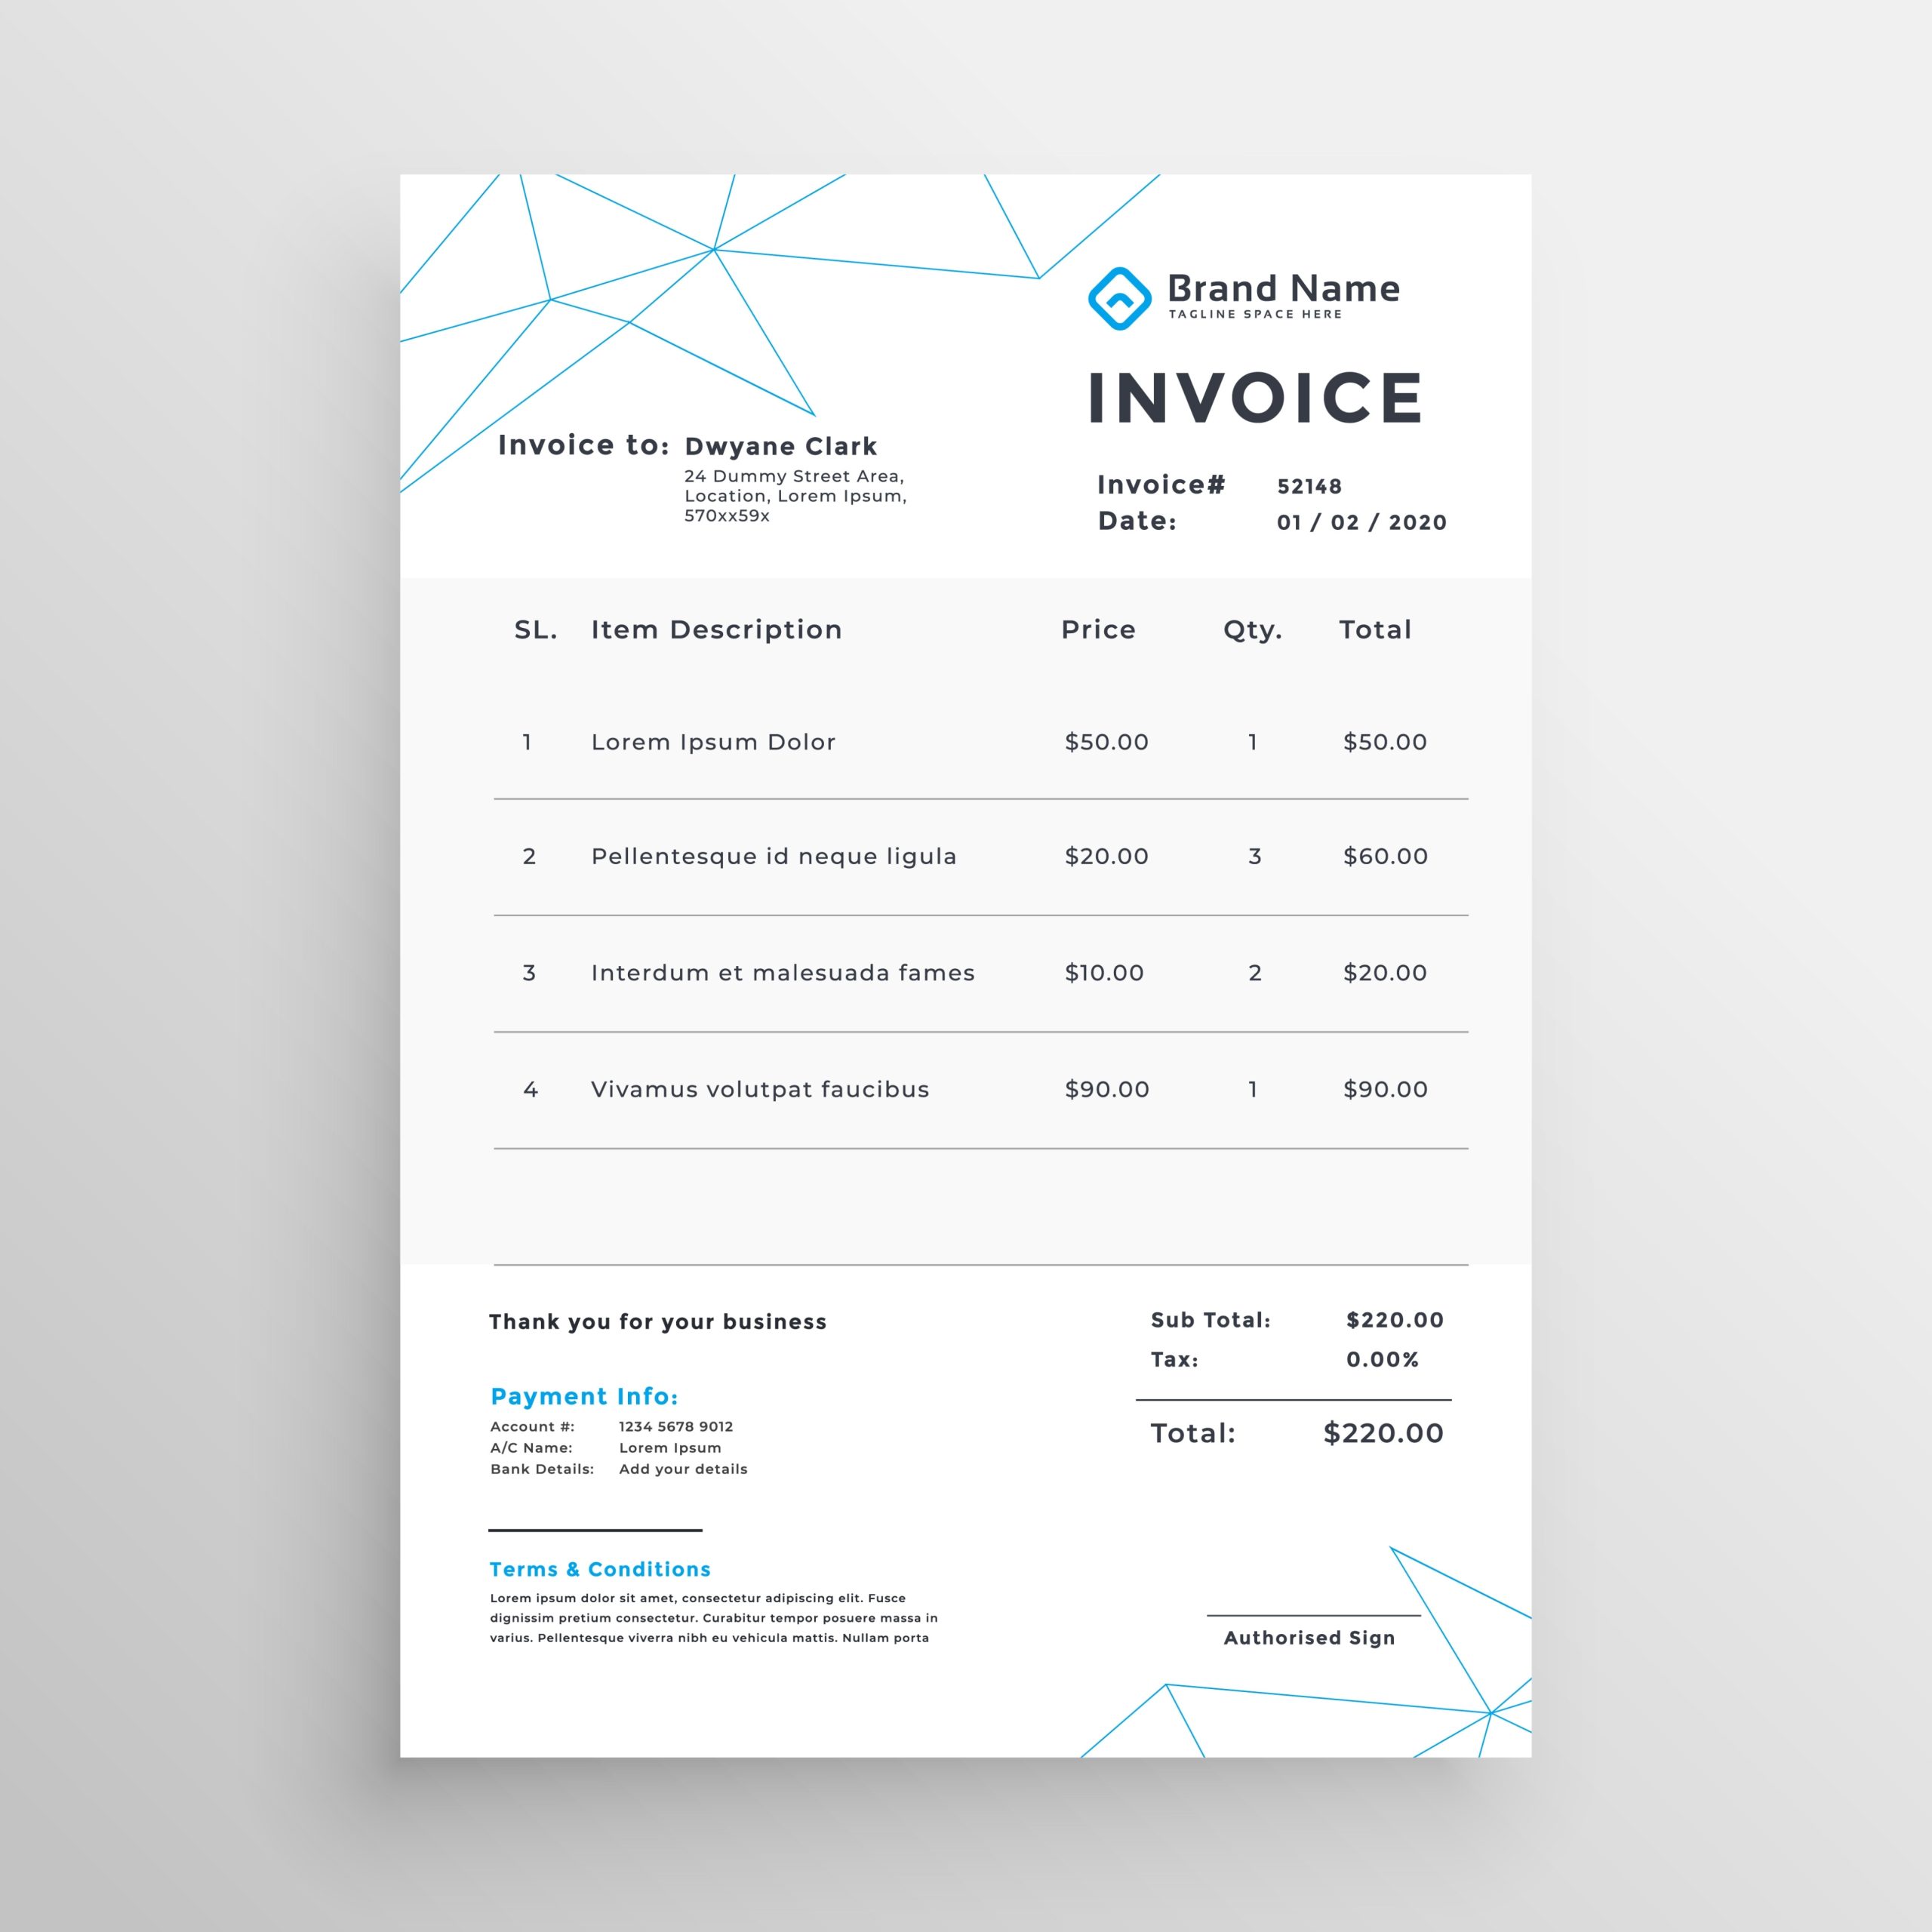 Minimal Vector Invoice Template Design - Download Free Vector Art, Stock Graphics &amp; Images pertaining to Invoice Template For Designers